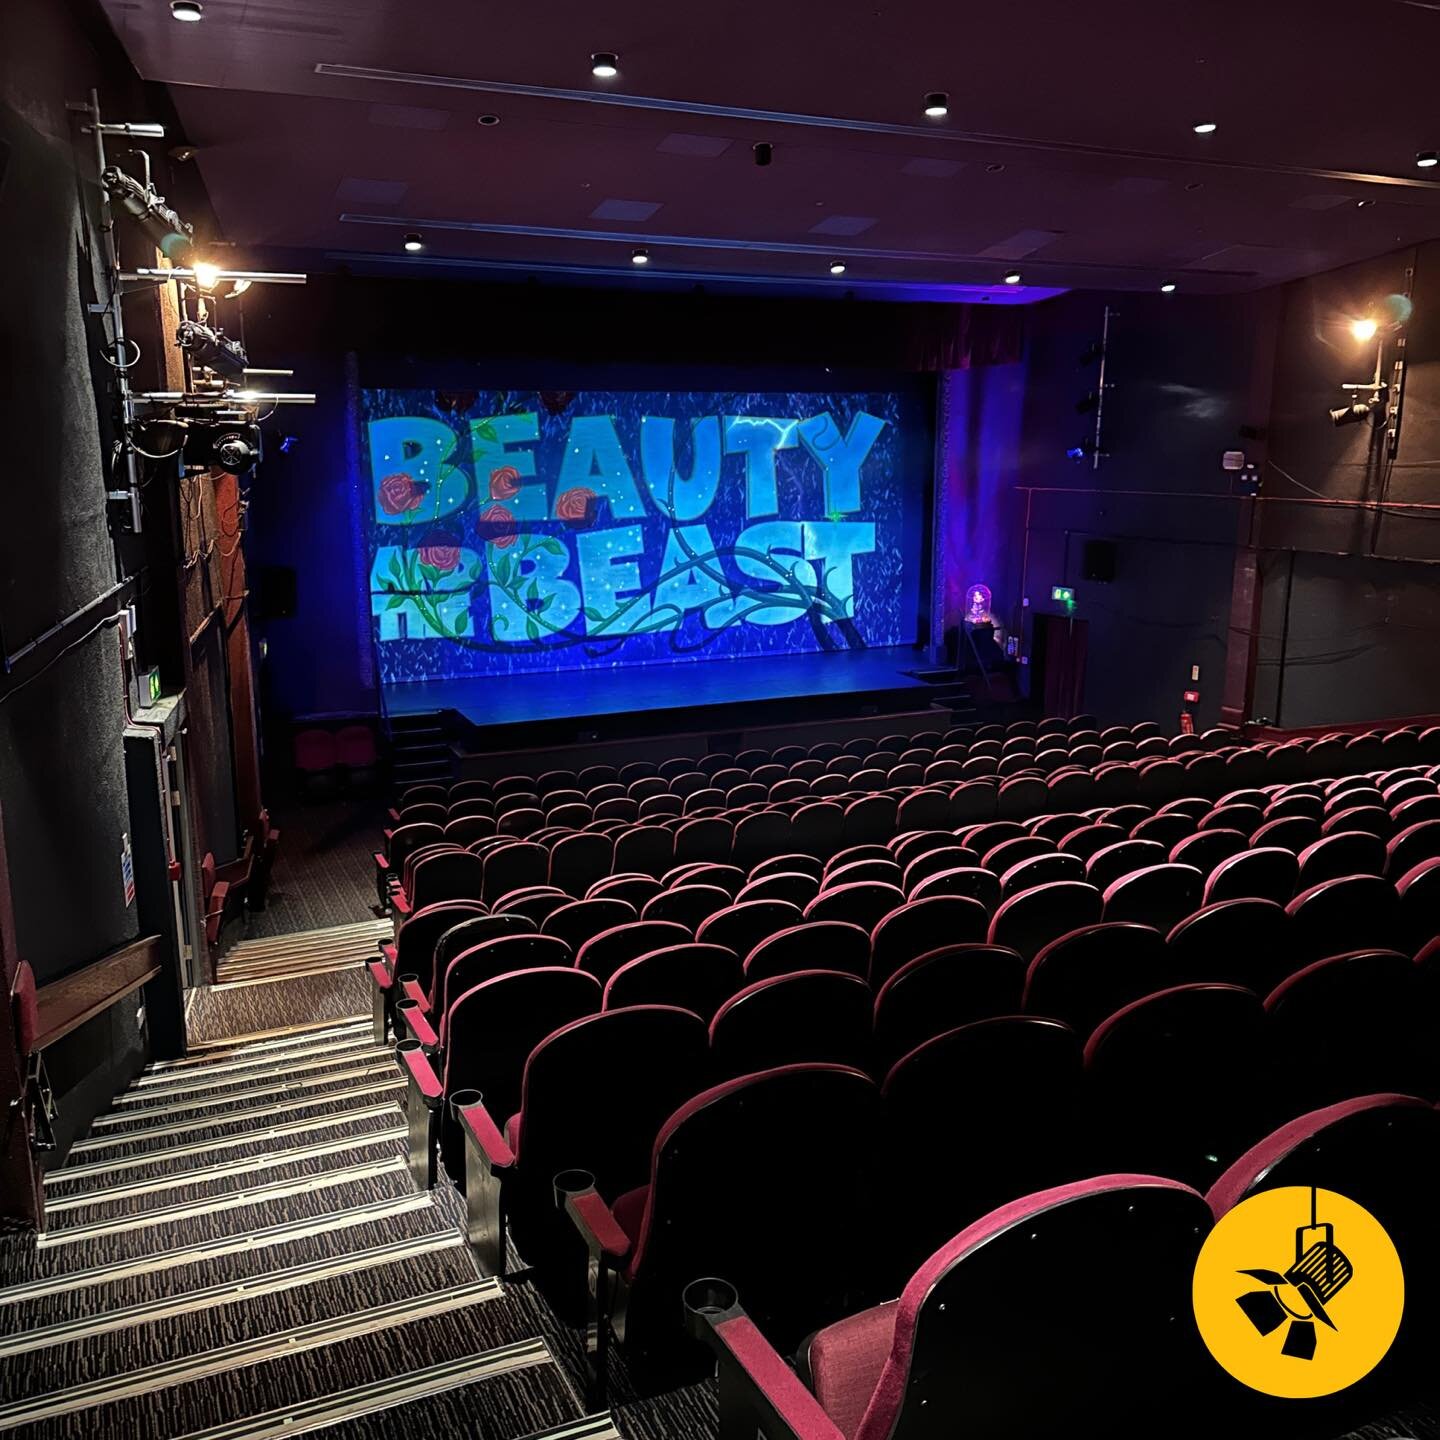 Panto season has started with Beauty and the Beast at Roses Theatre, Tewkesbury! We are delighted to design and provide lighting for this traditional pantomime and to  work with an incredible team!

We will continue to support while we shift our focu